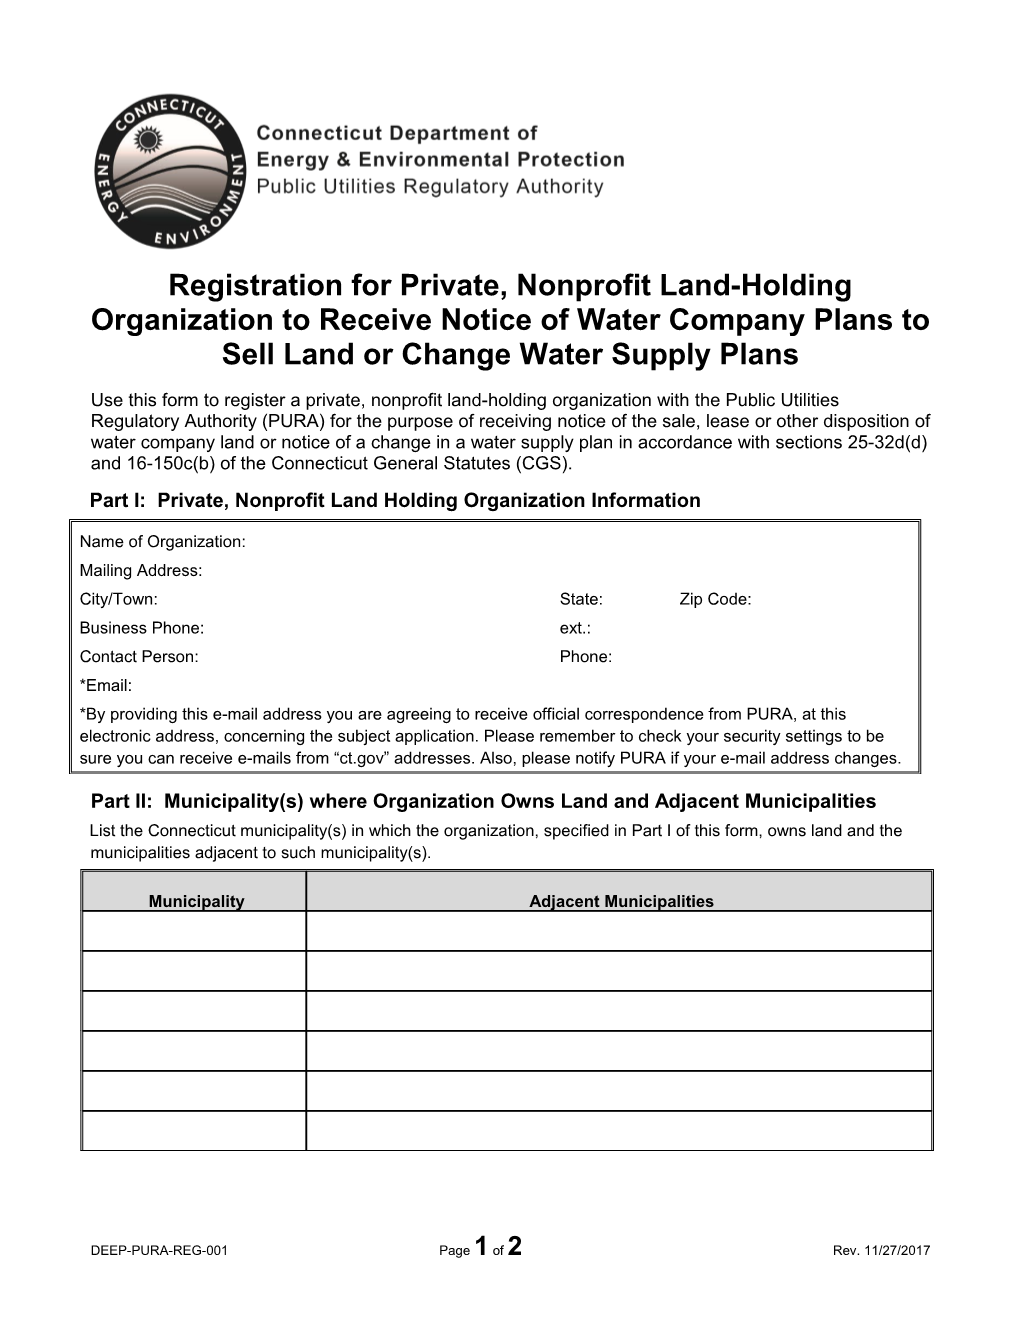 Registration for Private, Nonprofit Land Holding Organization to Receive Notice of Water